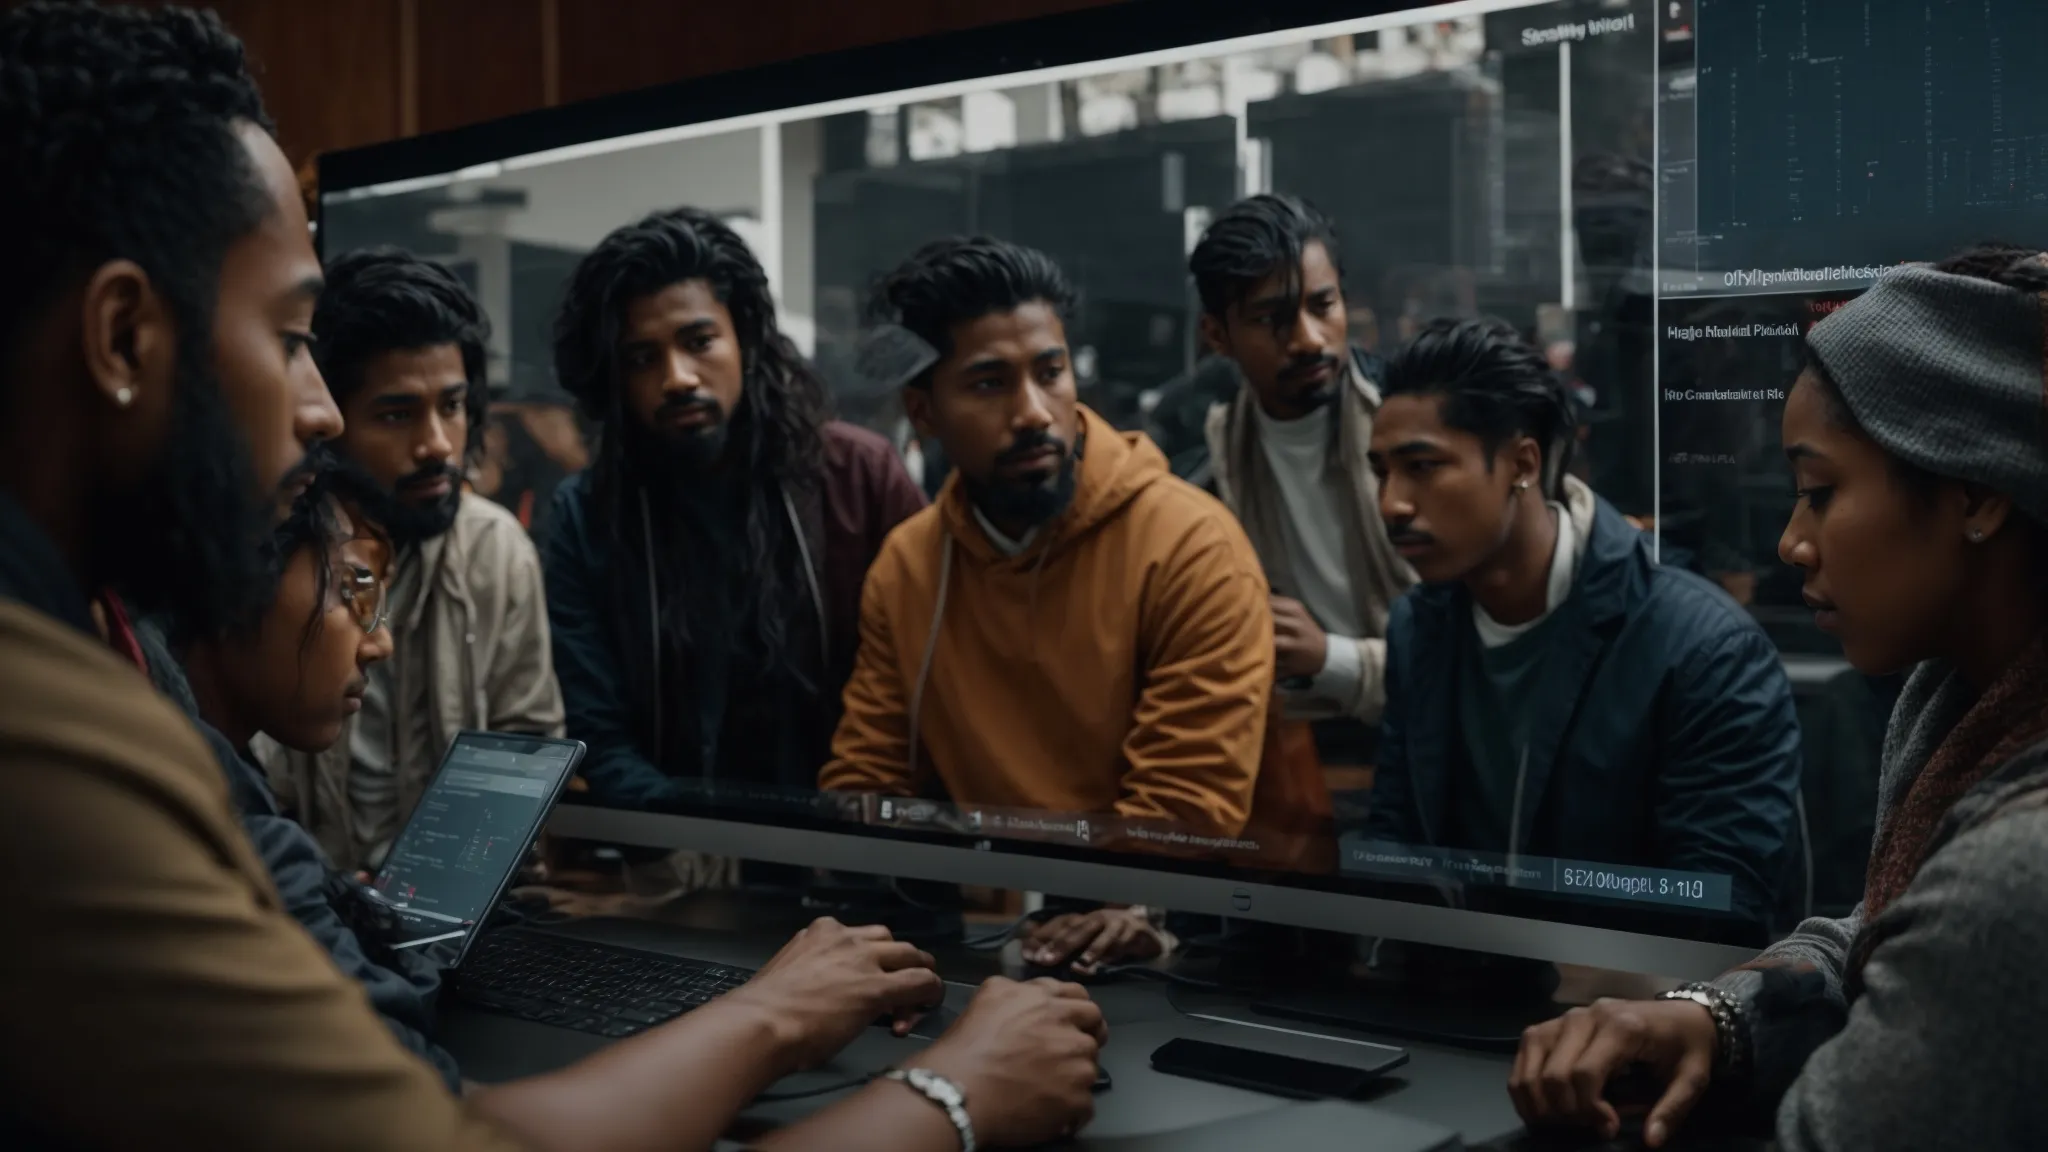 a diverse group of people from various cultures are gathered around a computer screen displaying youtube analytics.